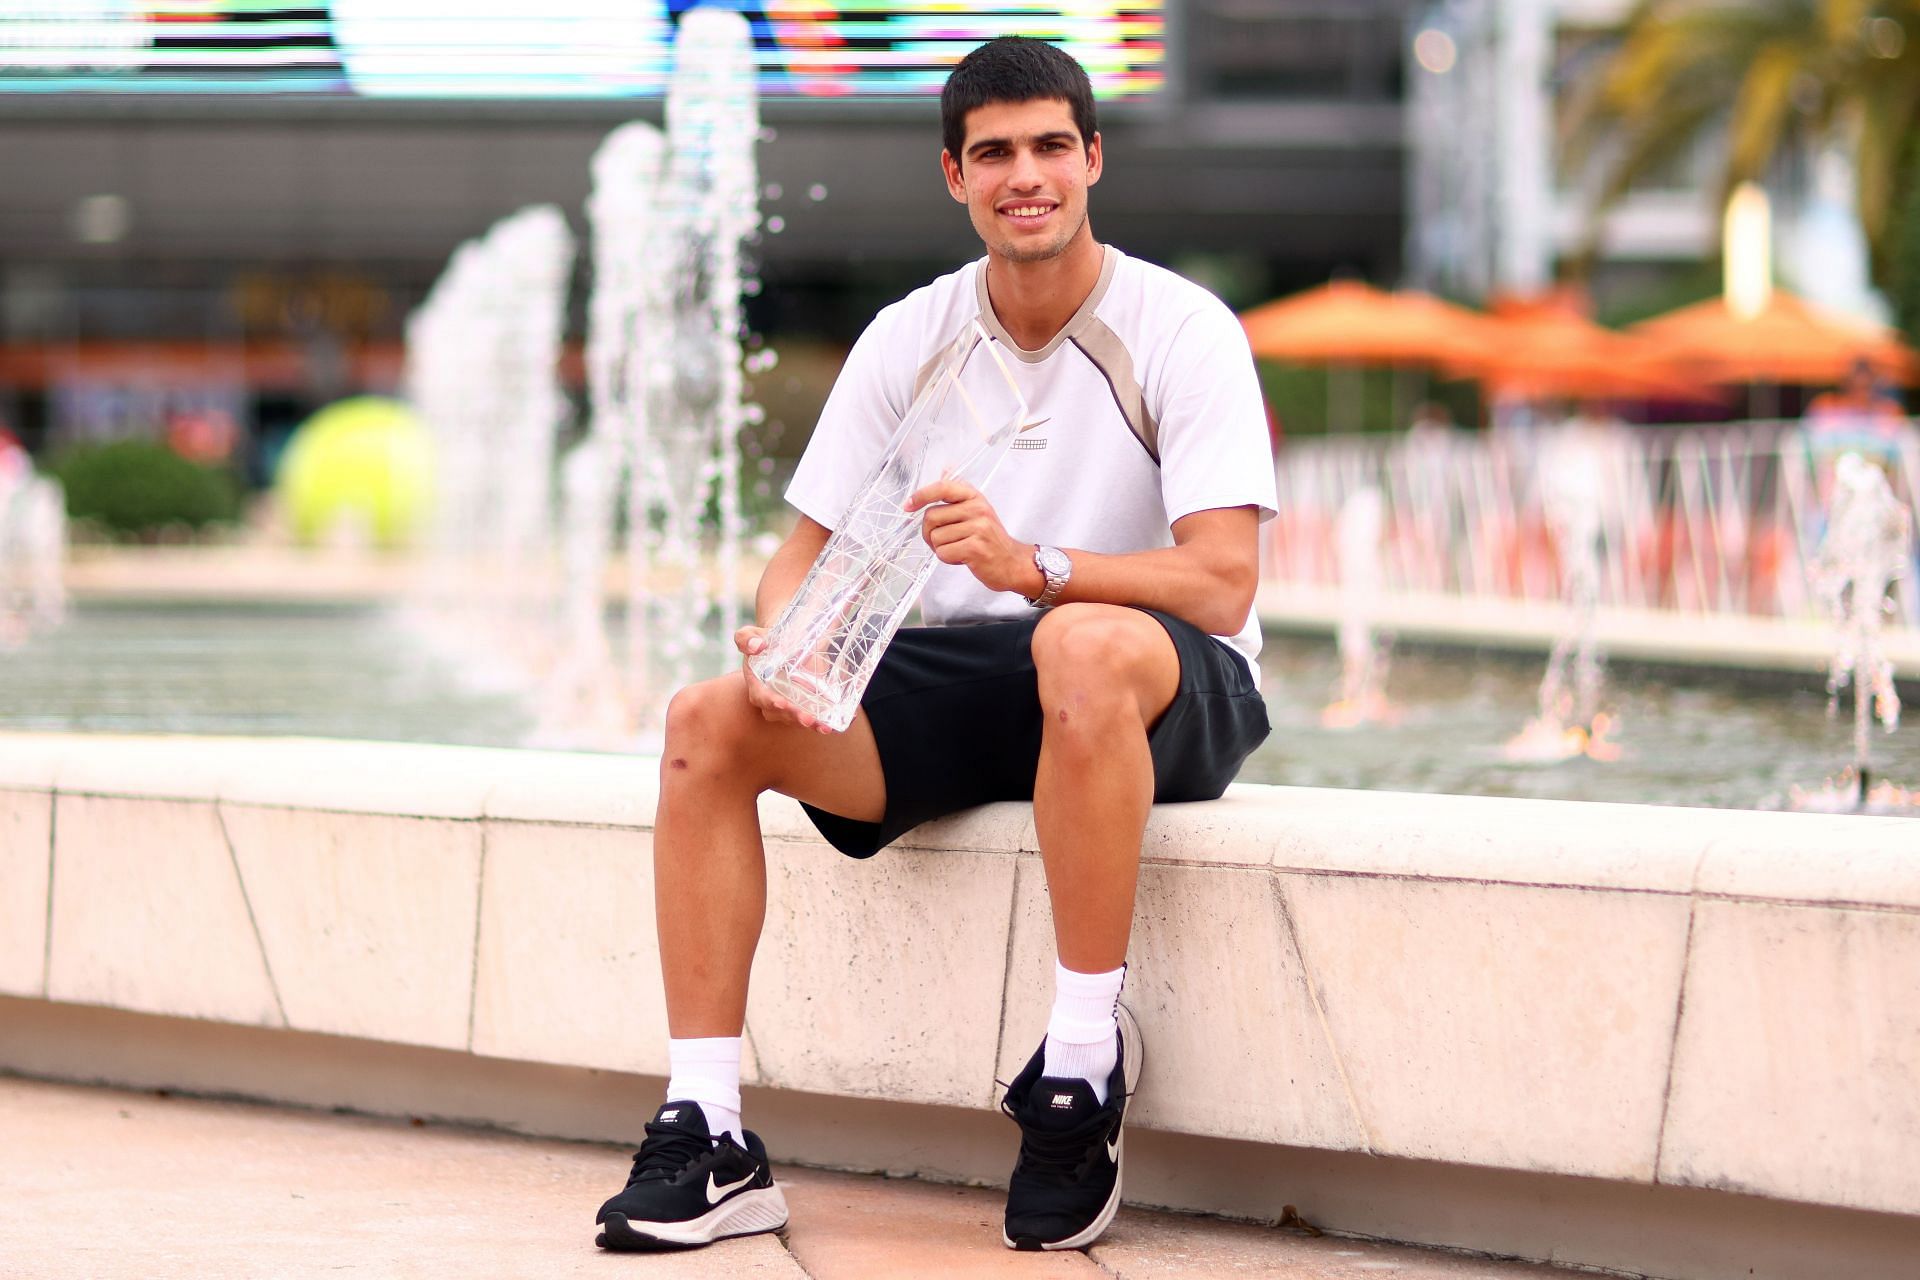 Carlos Alcaraz is one of the youngest Masters 1000 winners in history